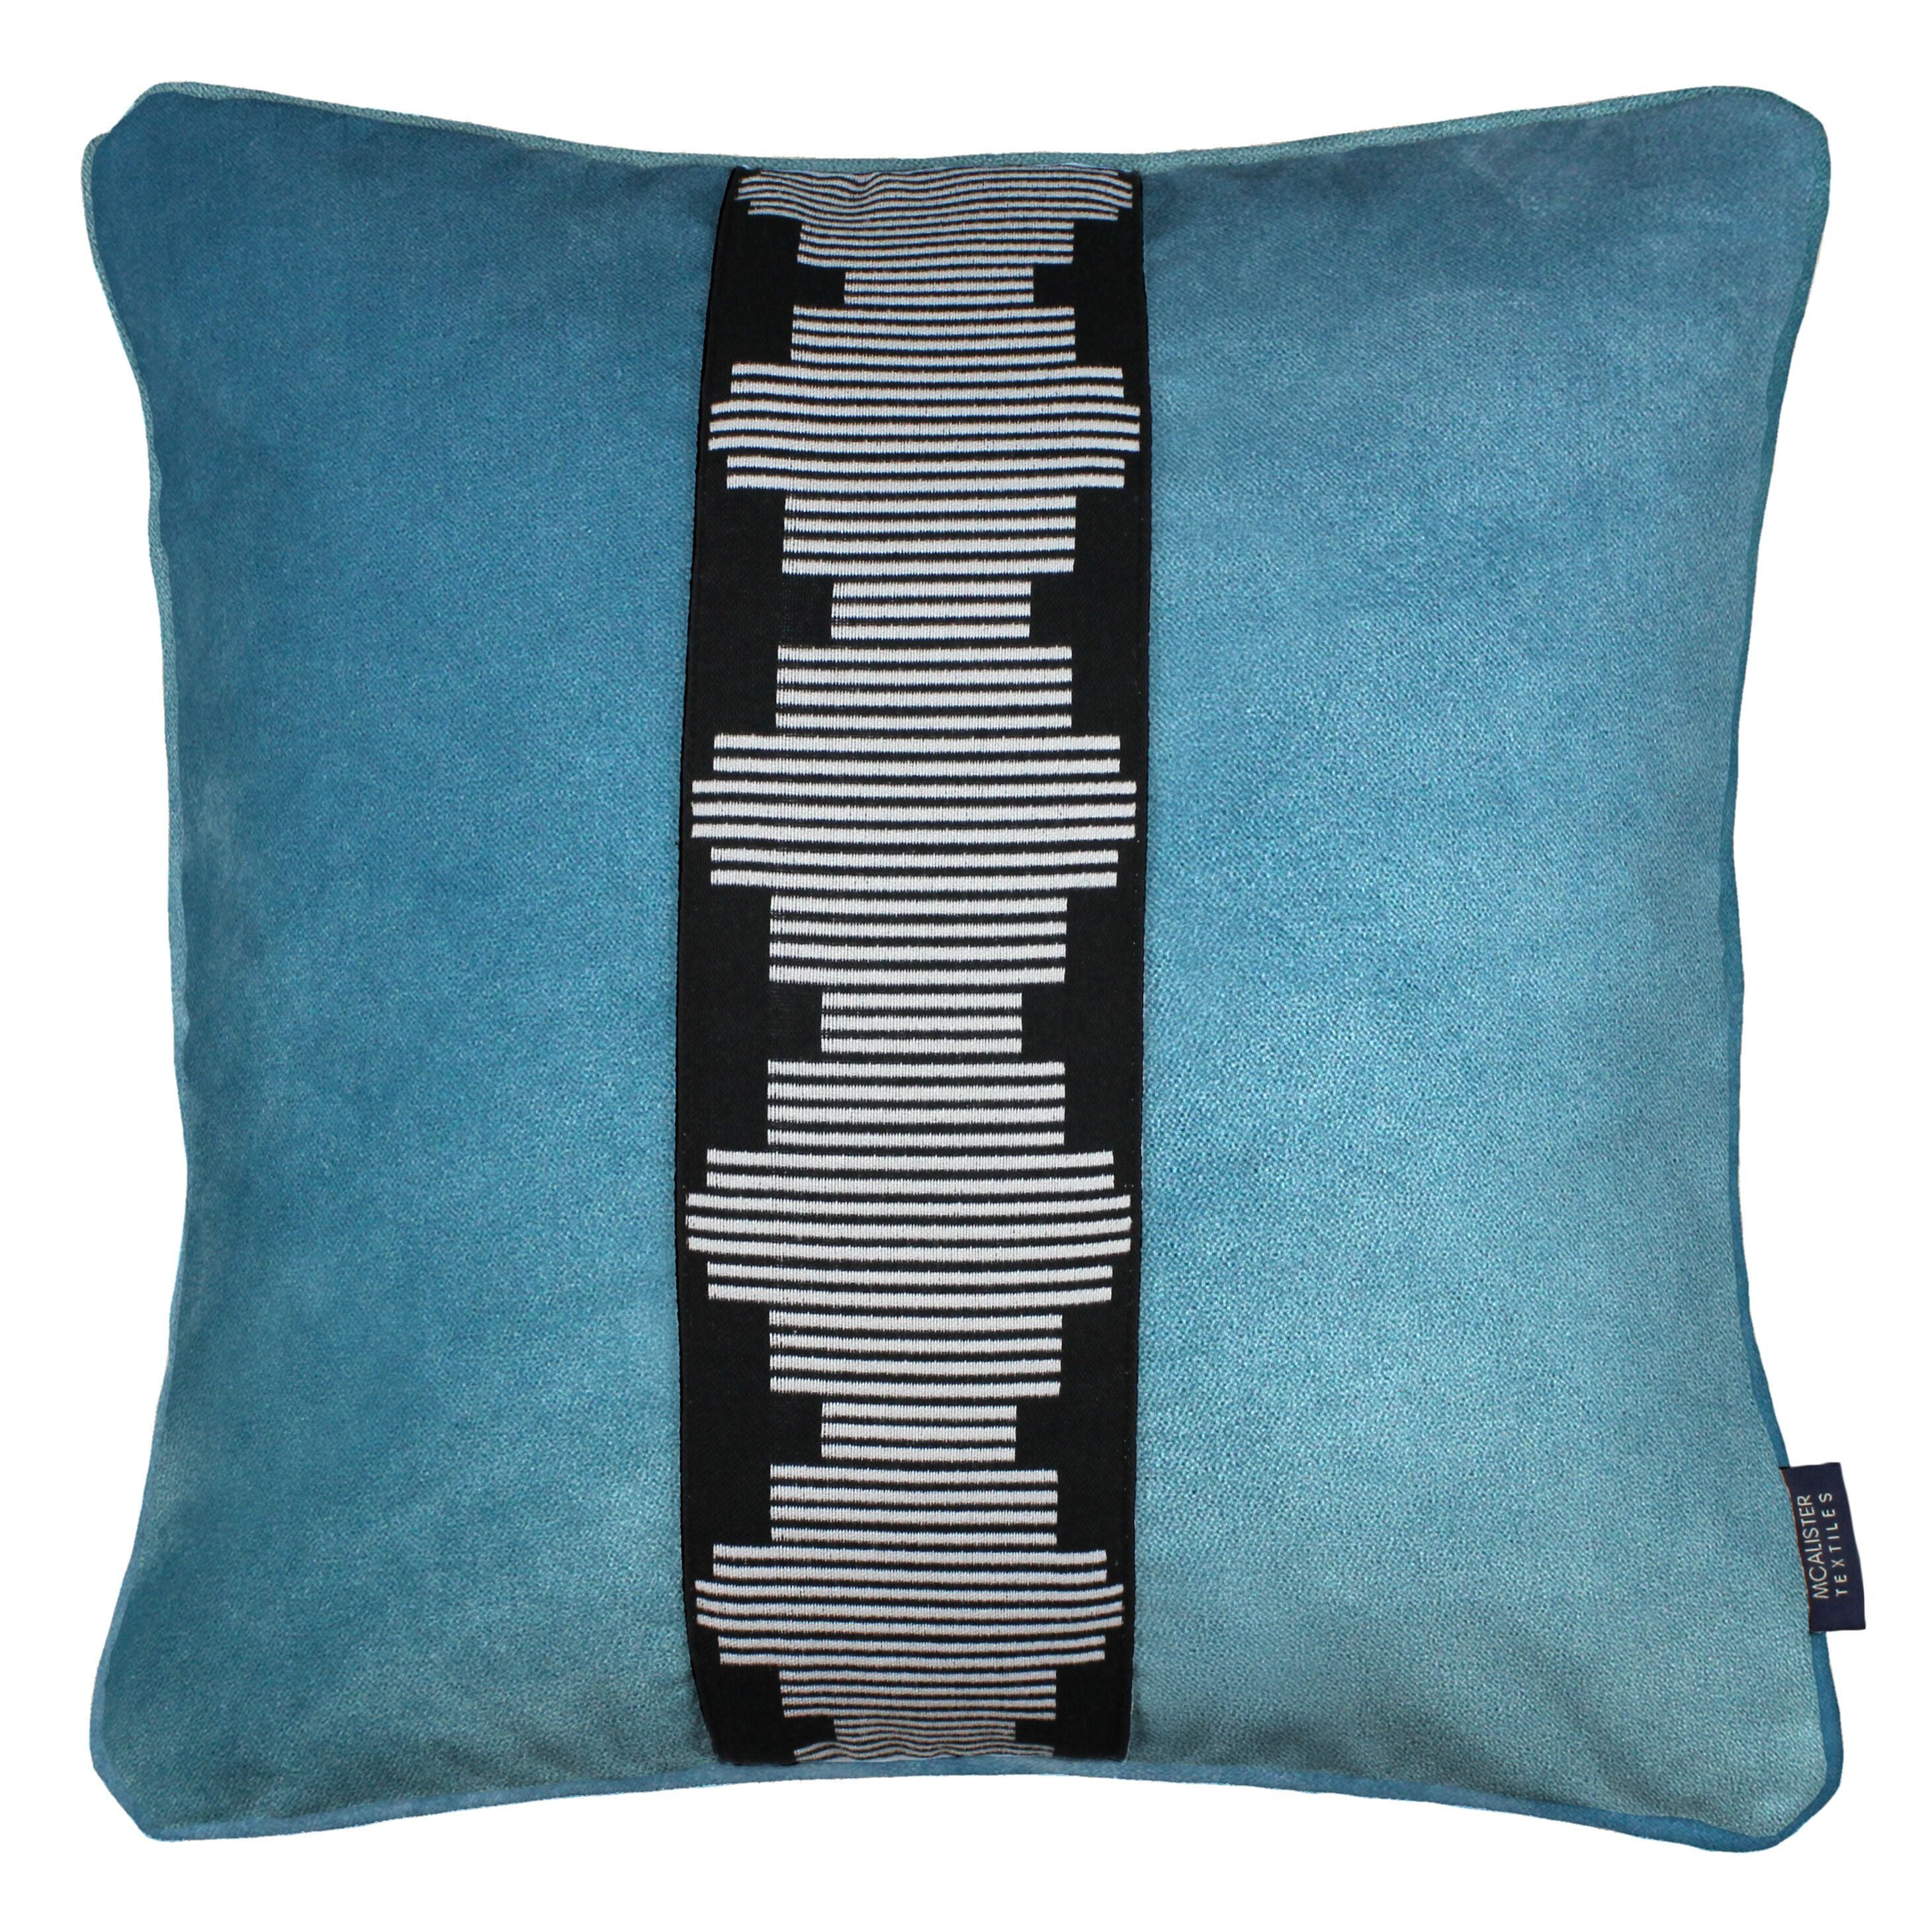 McAlister Textiles Maya Striped Duck Egg Blue Velvet Cushion Cushions and Covers Polyester Filler 43cm x 43cm 